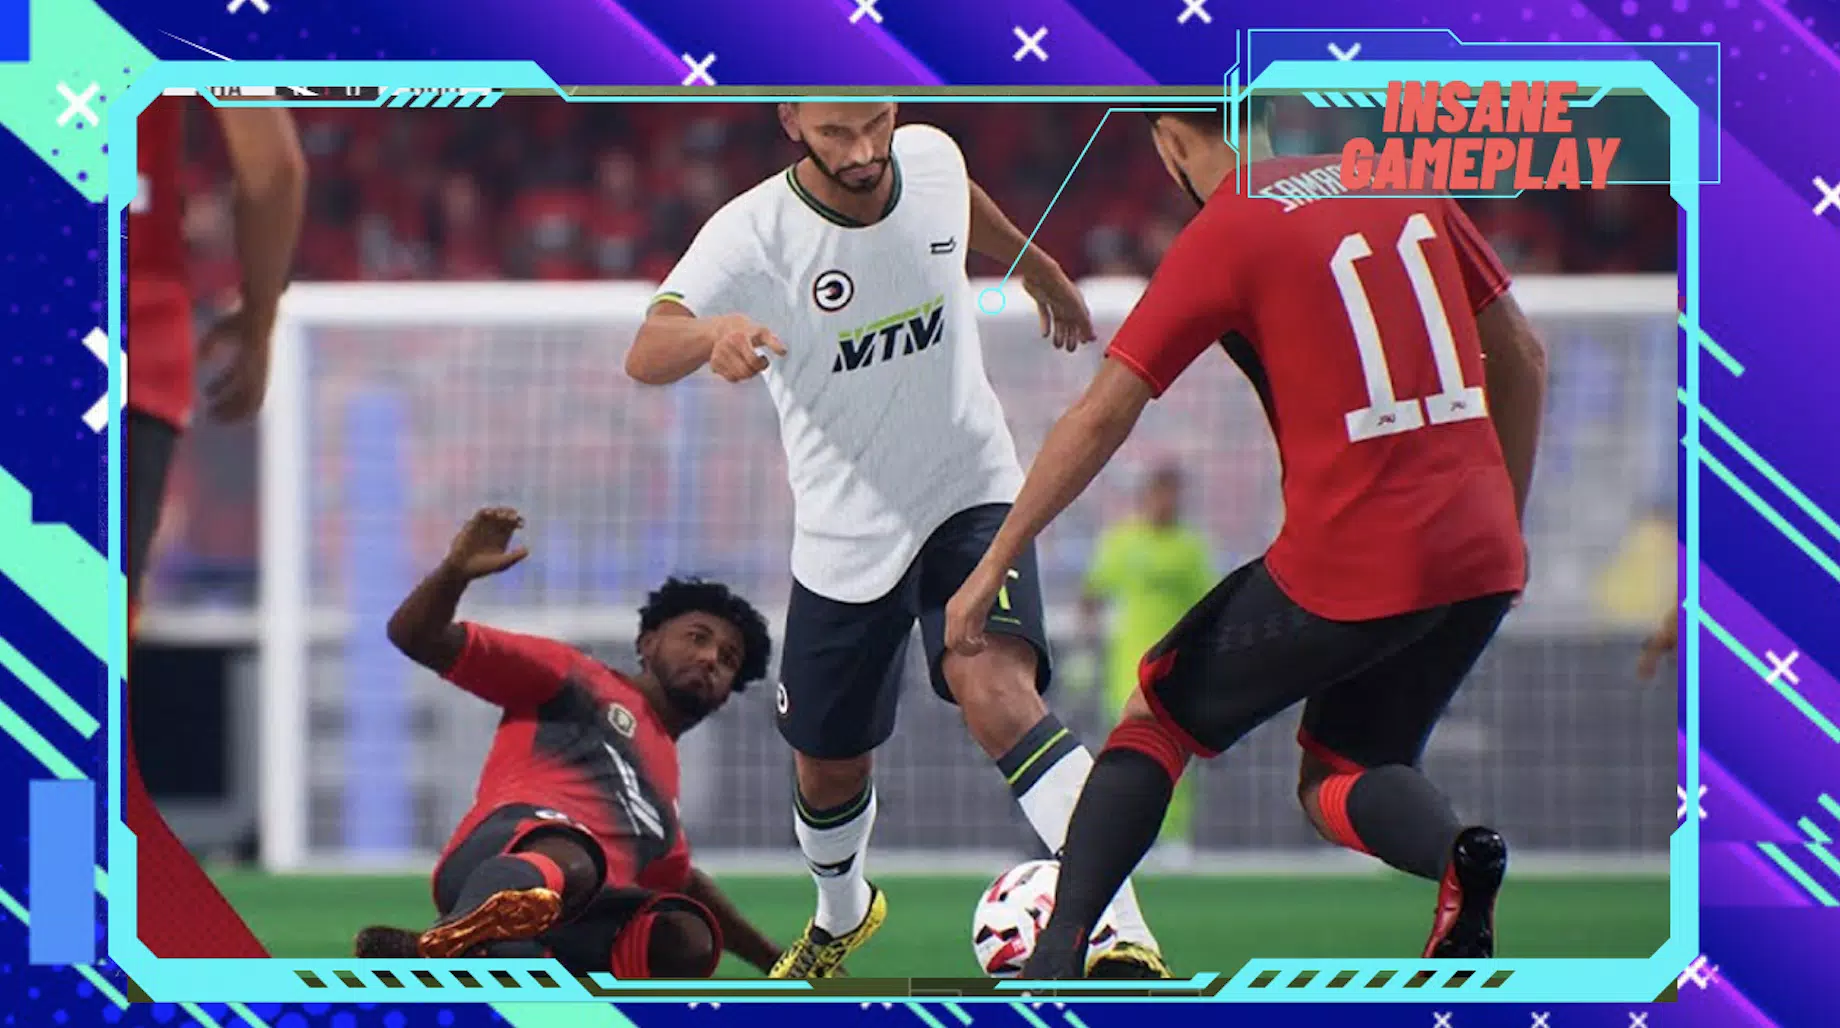 ePES UFL football 2023 Riddle APK pour Android Télécharger